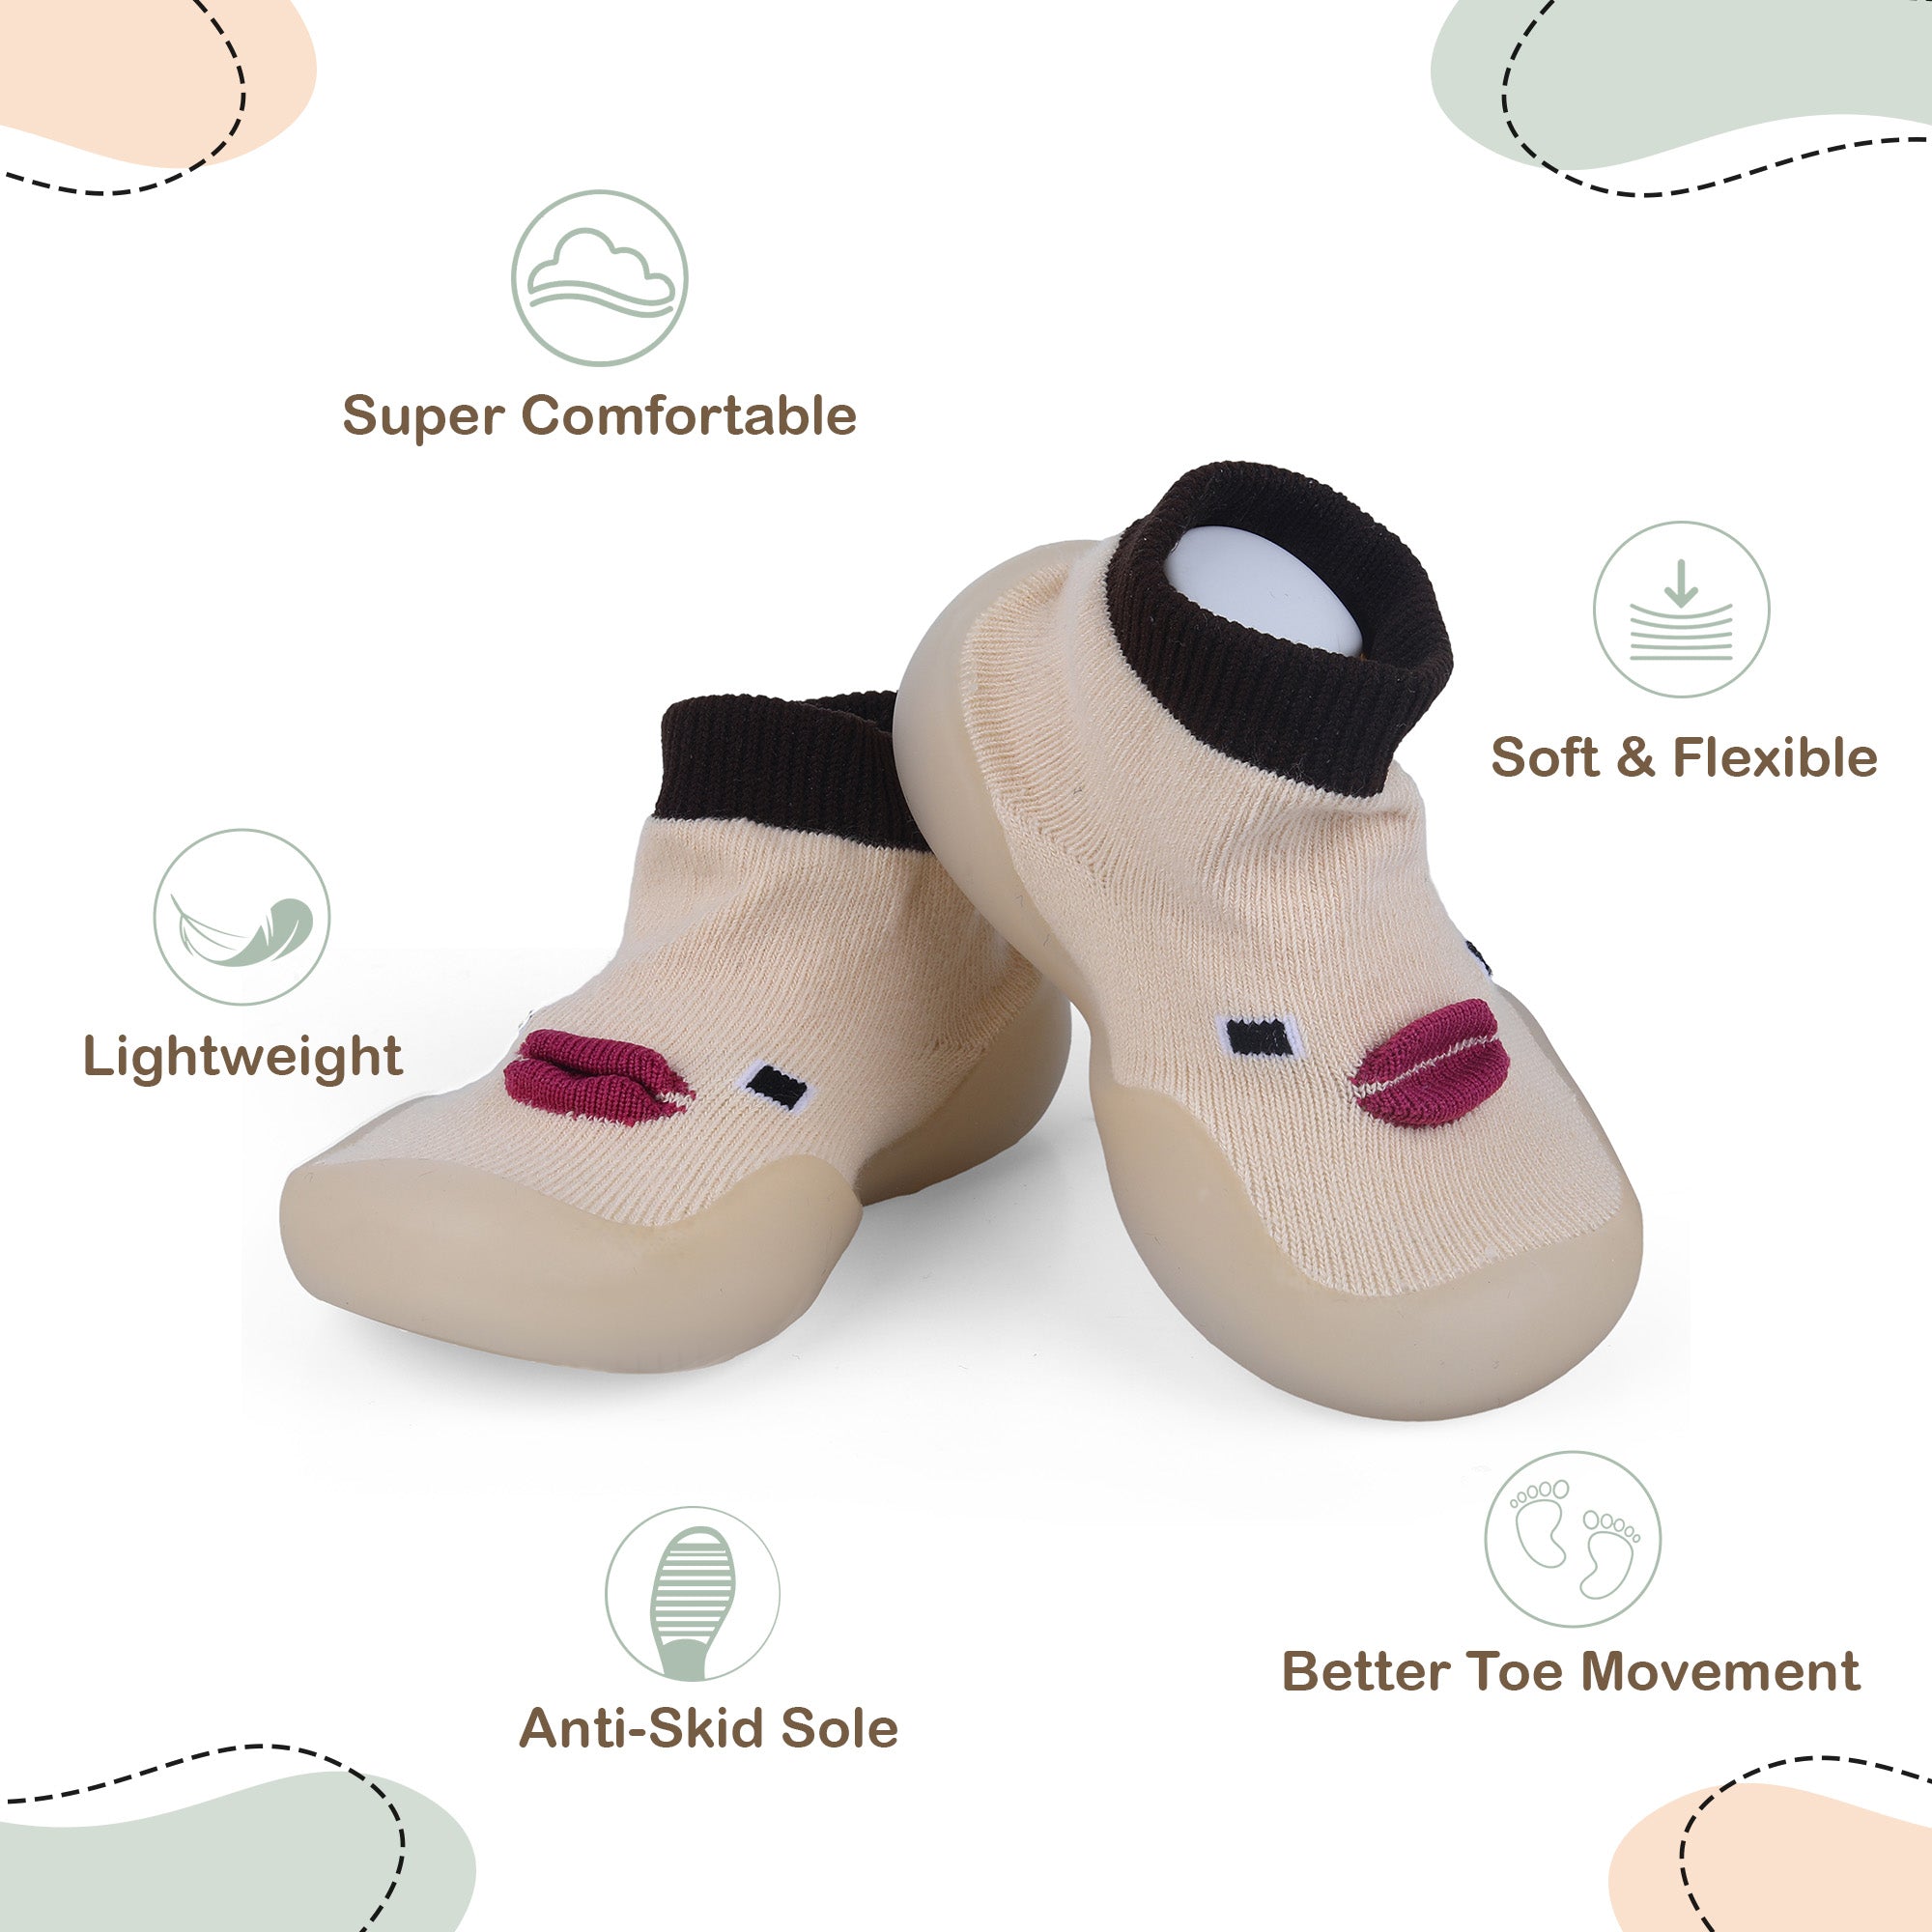 Baby Moo Cute Duck Face Rubber Comfortable Sole Slip-On Sock Shoes - Beige - Baby Moo